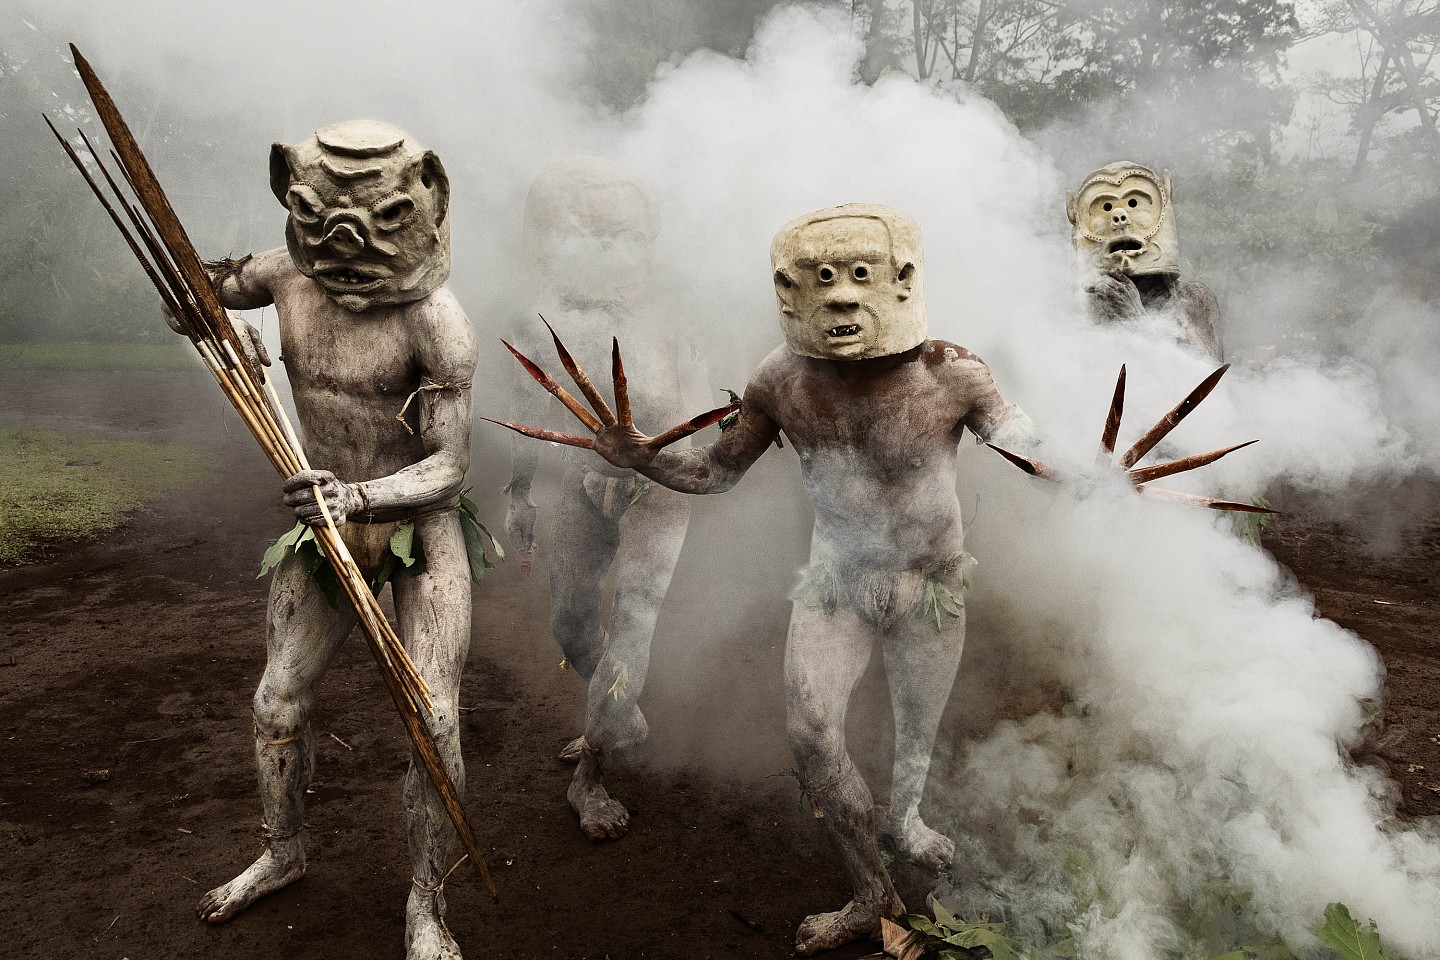 Steve McCurry, Tribesmen with Clay Masks and Bamboo Garb, Papua New Guinea, 2017
FujiFlex Crystal Archive Print, 30 x 40 in. (76.2 x 101.6 cm)
10001